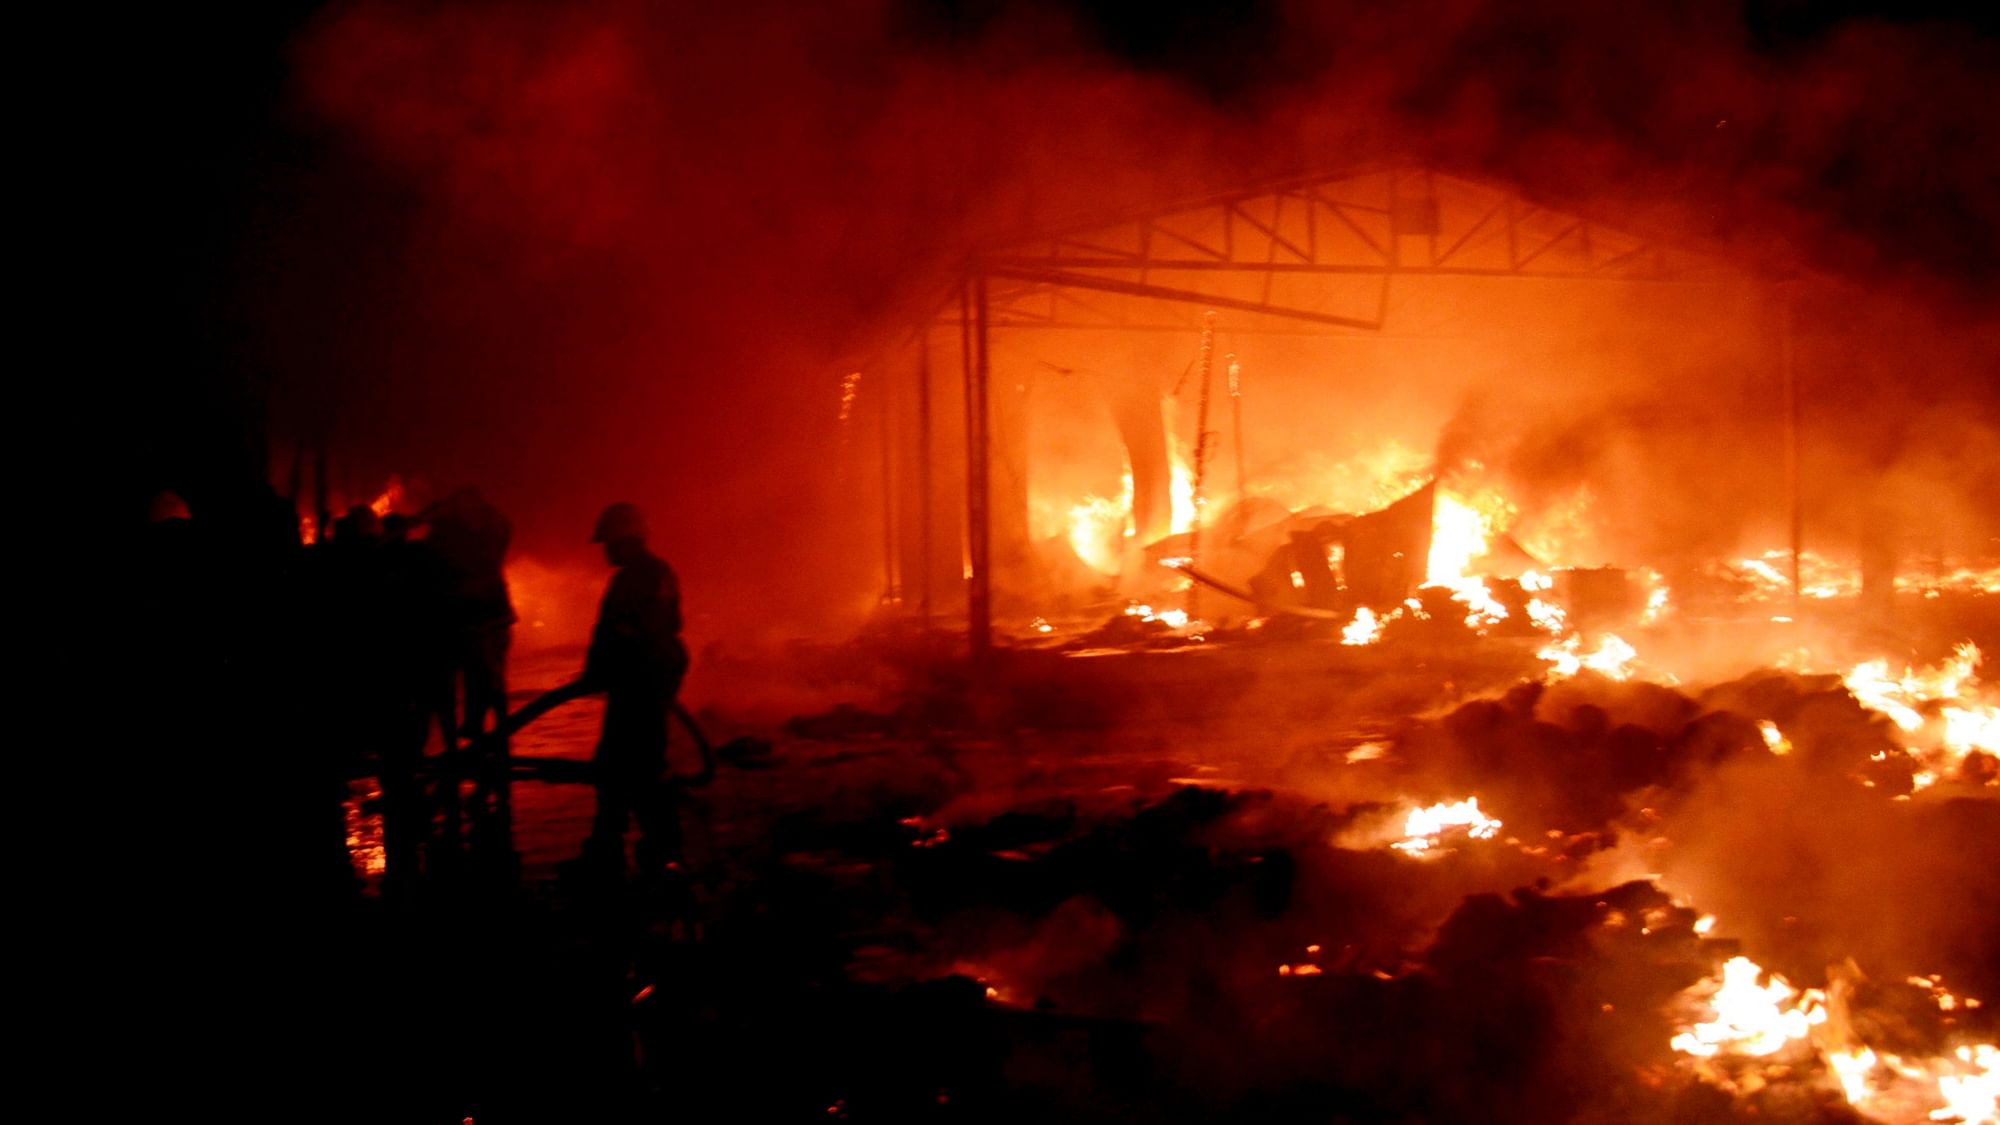 A major fire broke out at the Nampally Exhibition Grounds in Hyderabad late on Wednesday, 30 January.